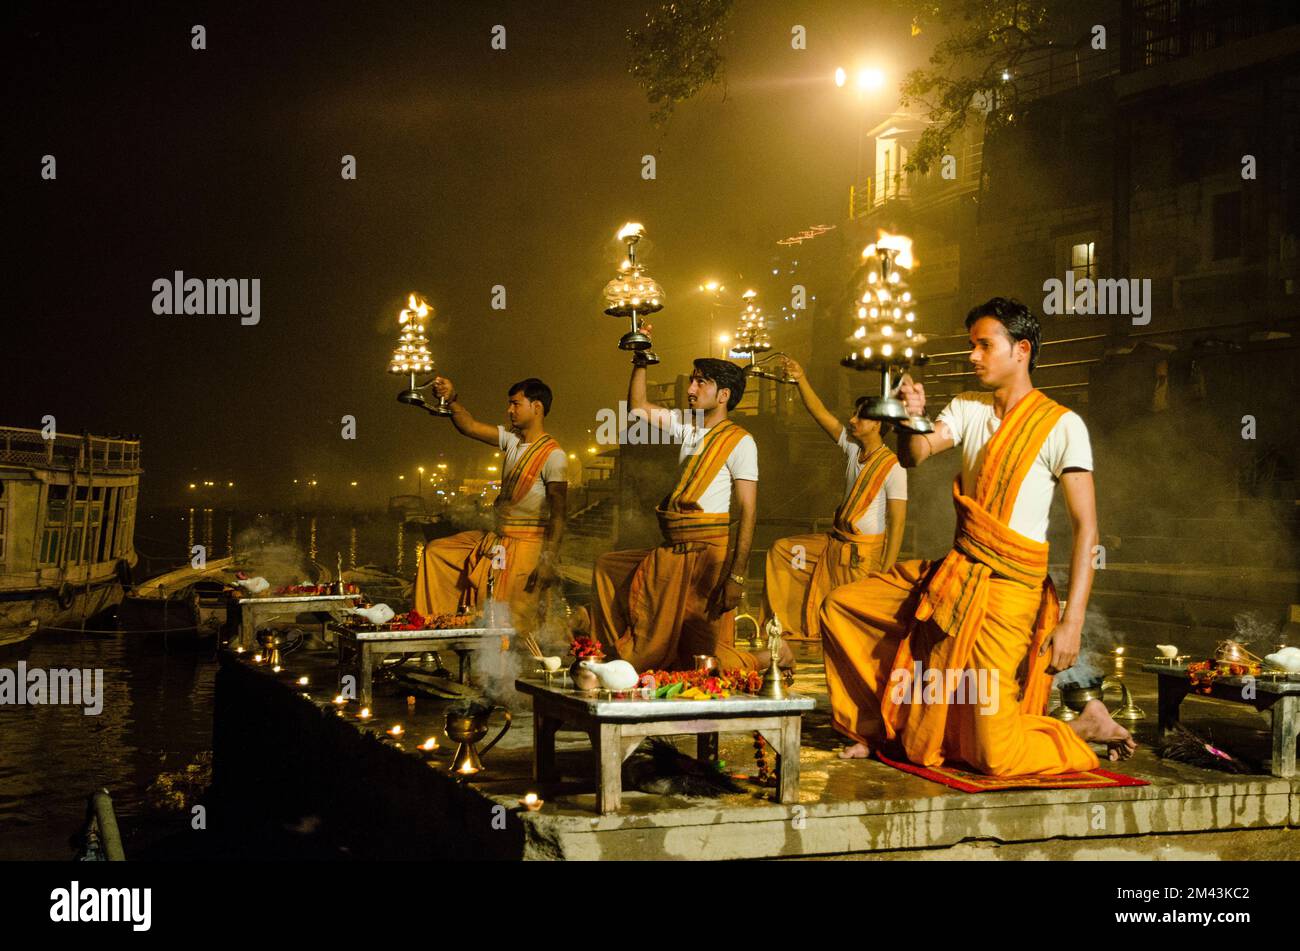 Aartii, the evening ceremony, is performed at many places all along the holy river Ganges, here at the main ghat Stock Photo